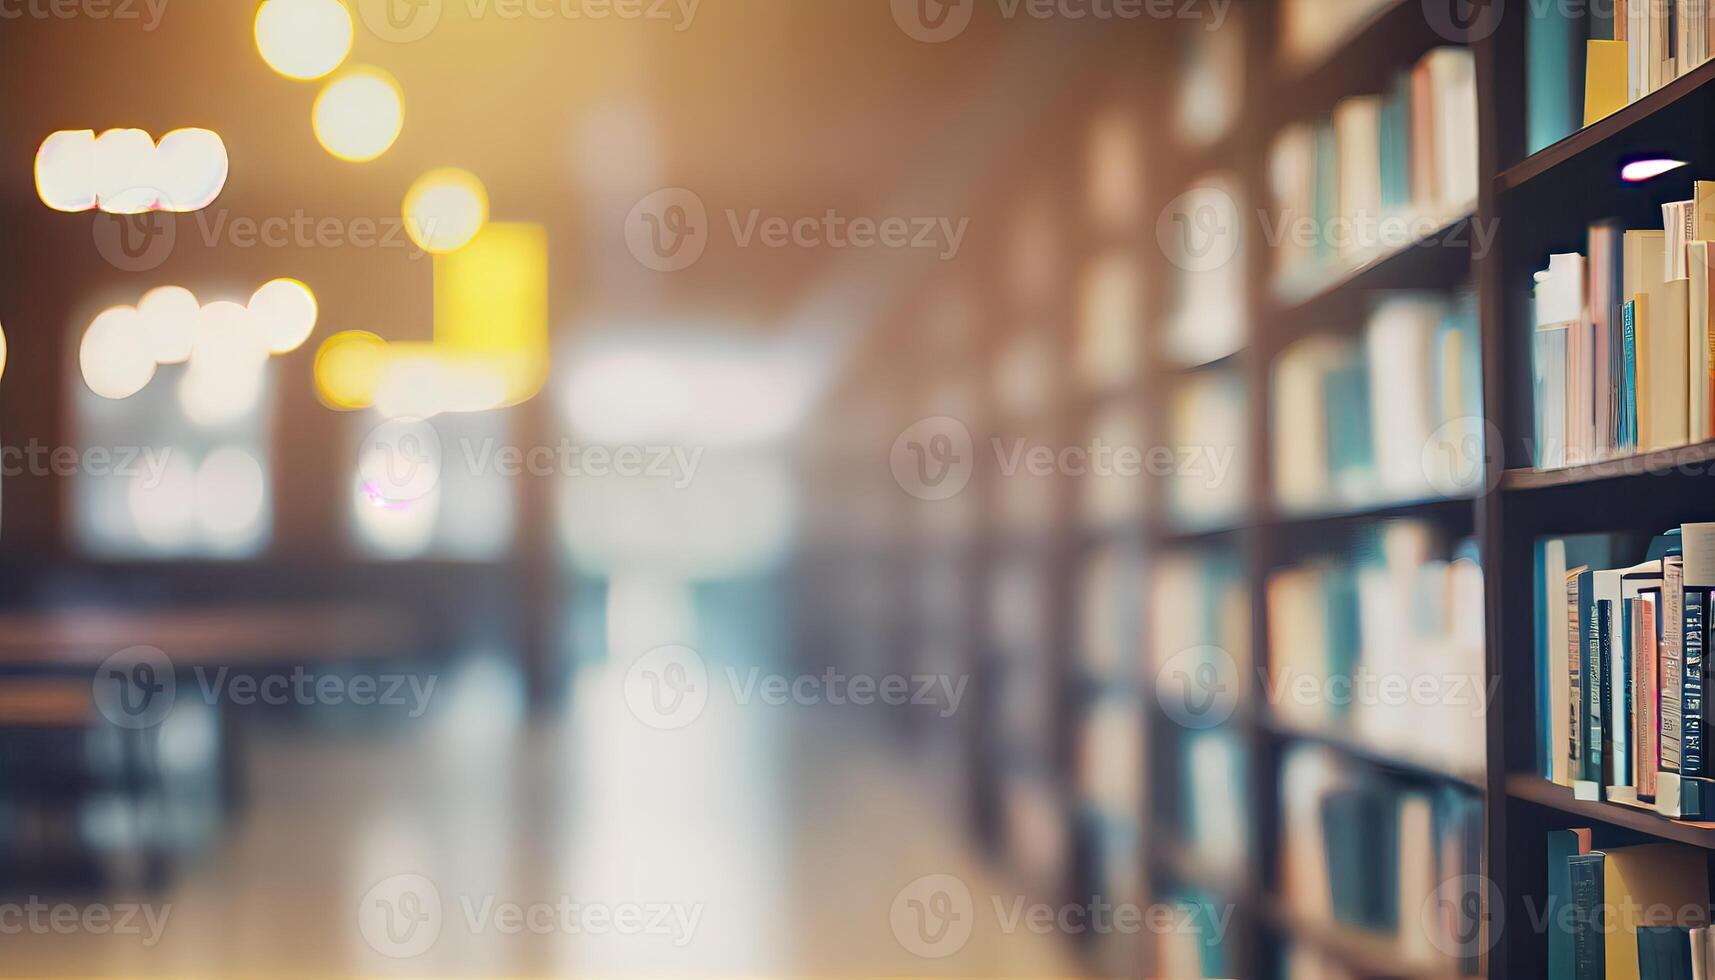 Abstract blurred public library interior space. blurry room with bookshelves by defocused effect. use for background or backdrop in Abstract blurred publicbusiness or education concepts. photo